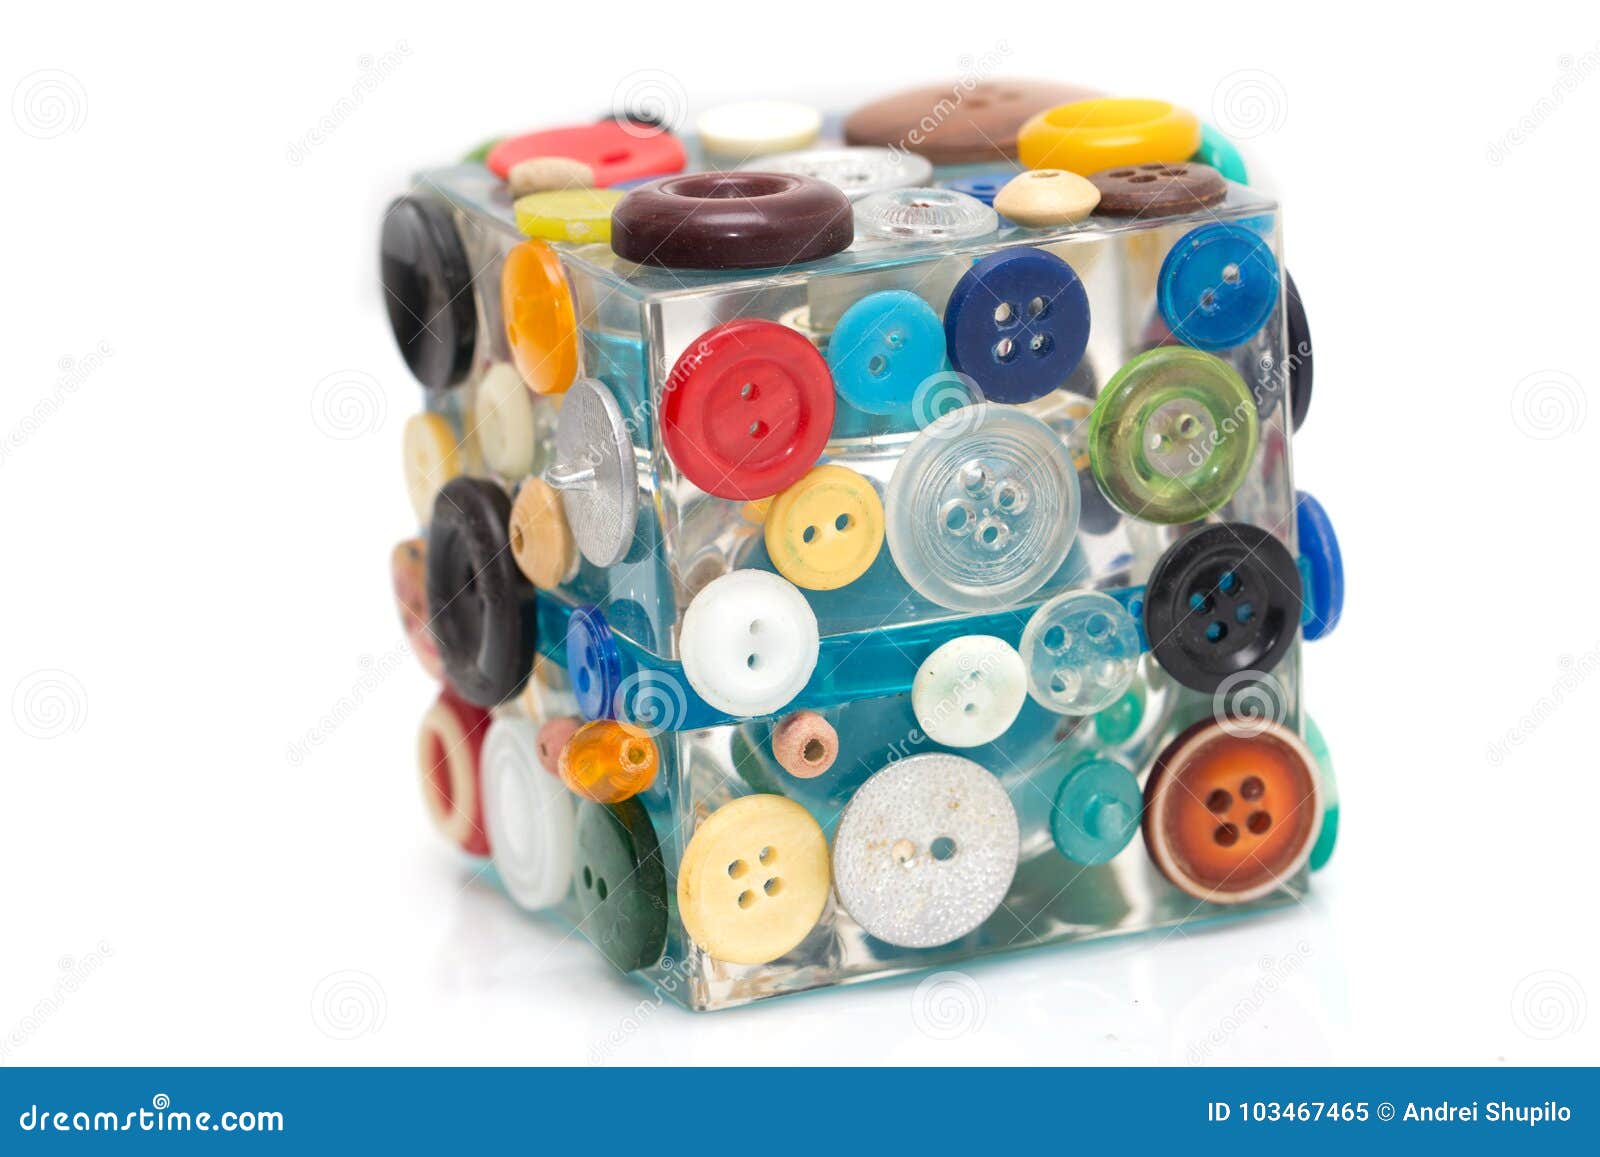 Colored buttons stock image. Image of plastic, group - 103467465